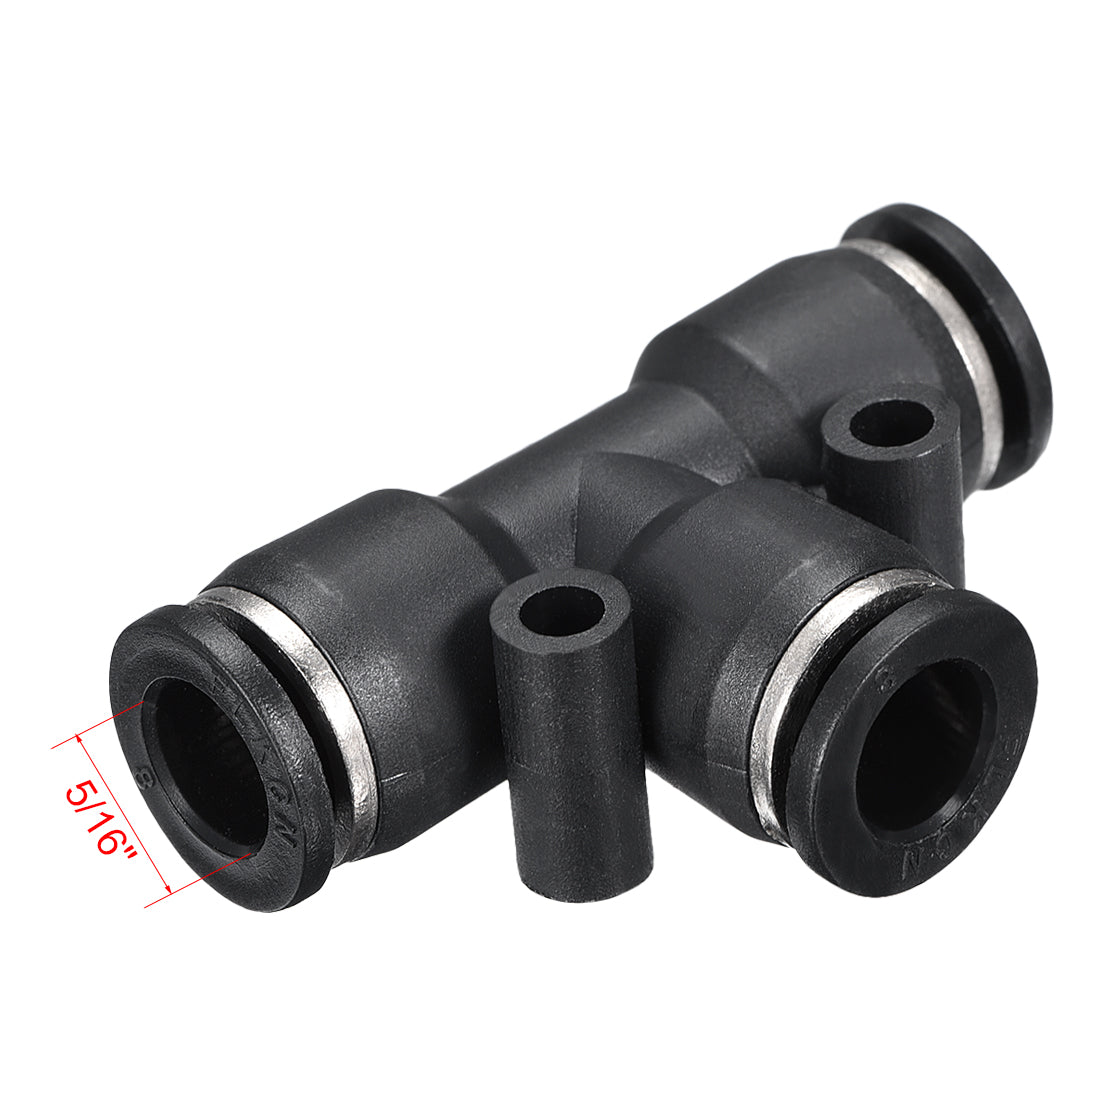 uxcell Uxcell 5 pcs Push To Connect Fittings T Type Tube Connect 8 mm or 5/16" od Push Fit Fittings Tube Fittings Push Lock (8mm T tee)